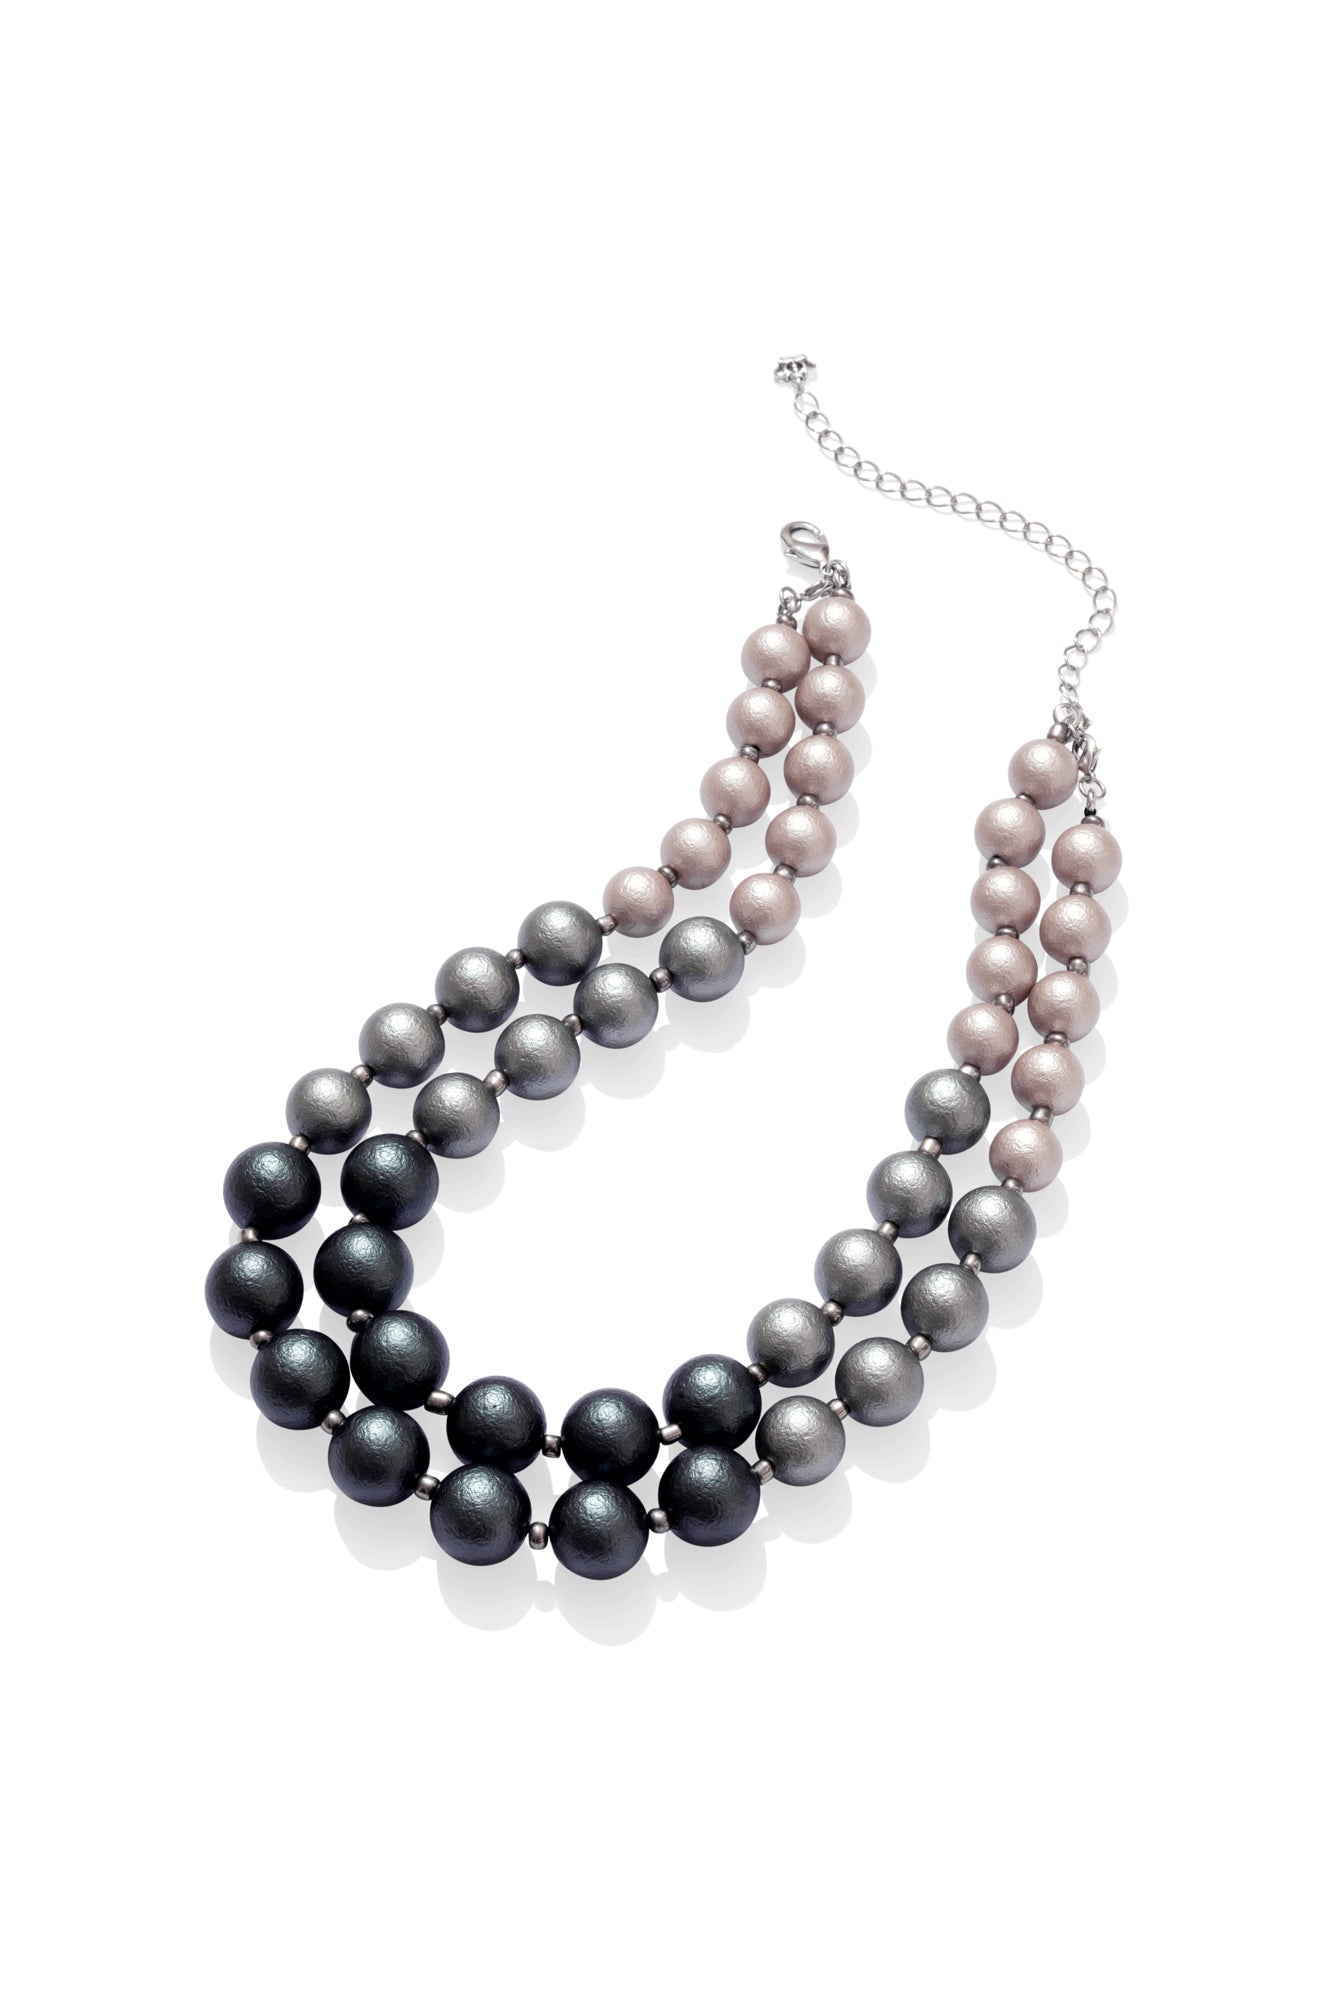 Two flexible length strands of rhodium plated faux pearls in three shades of grey